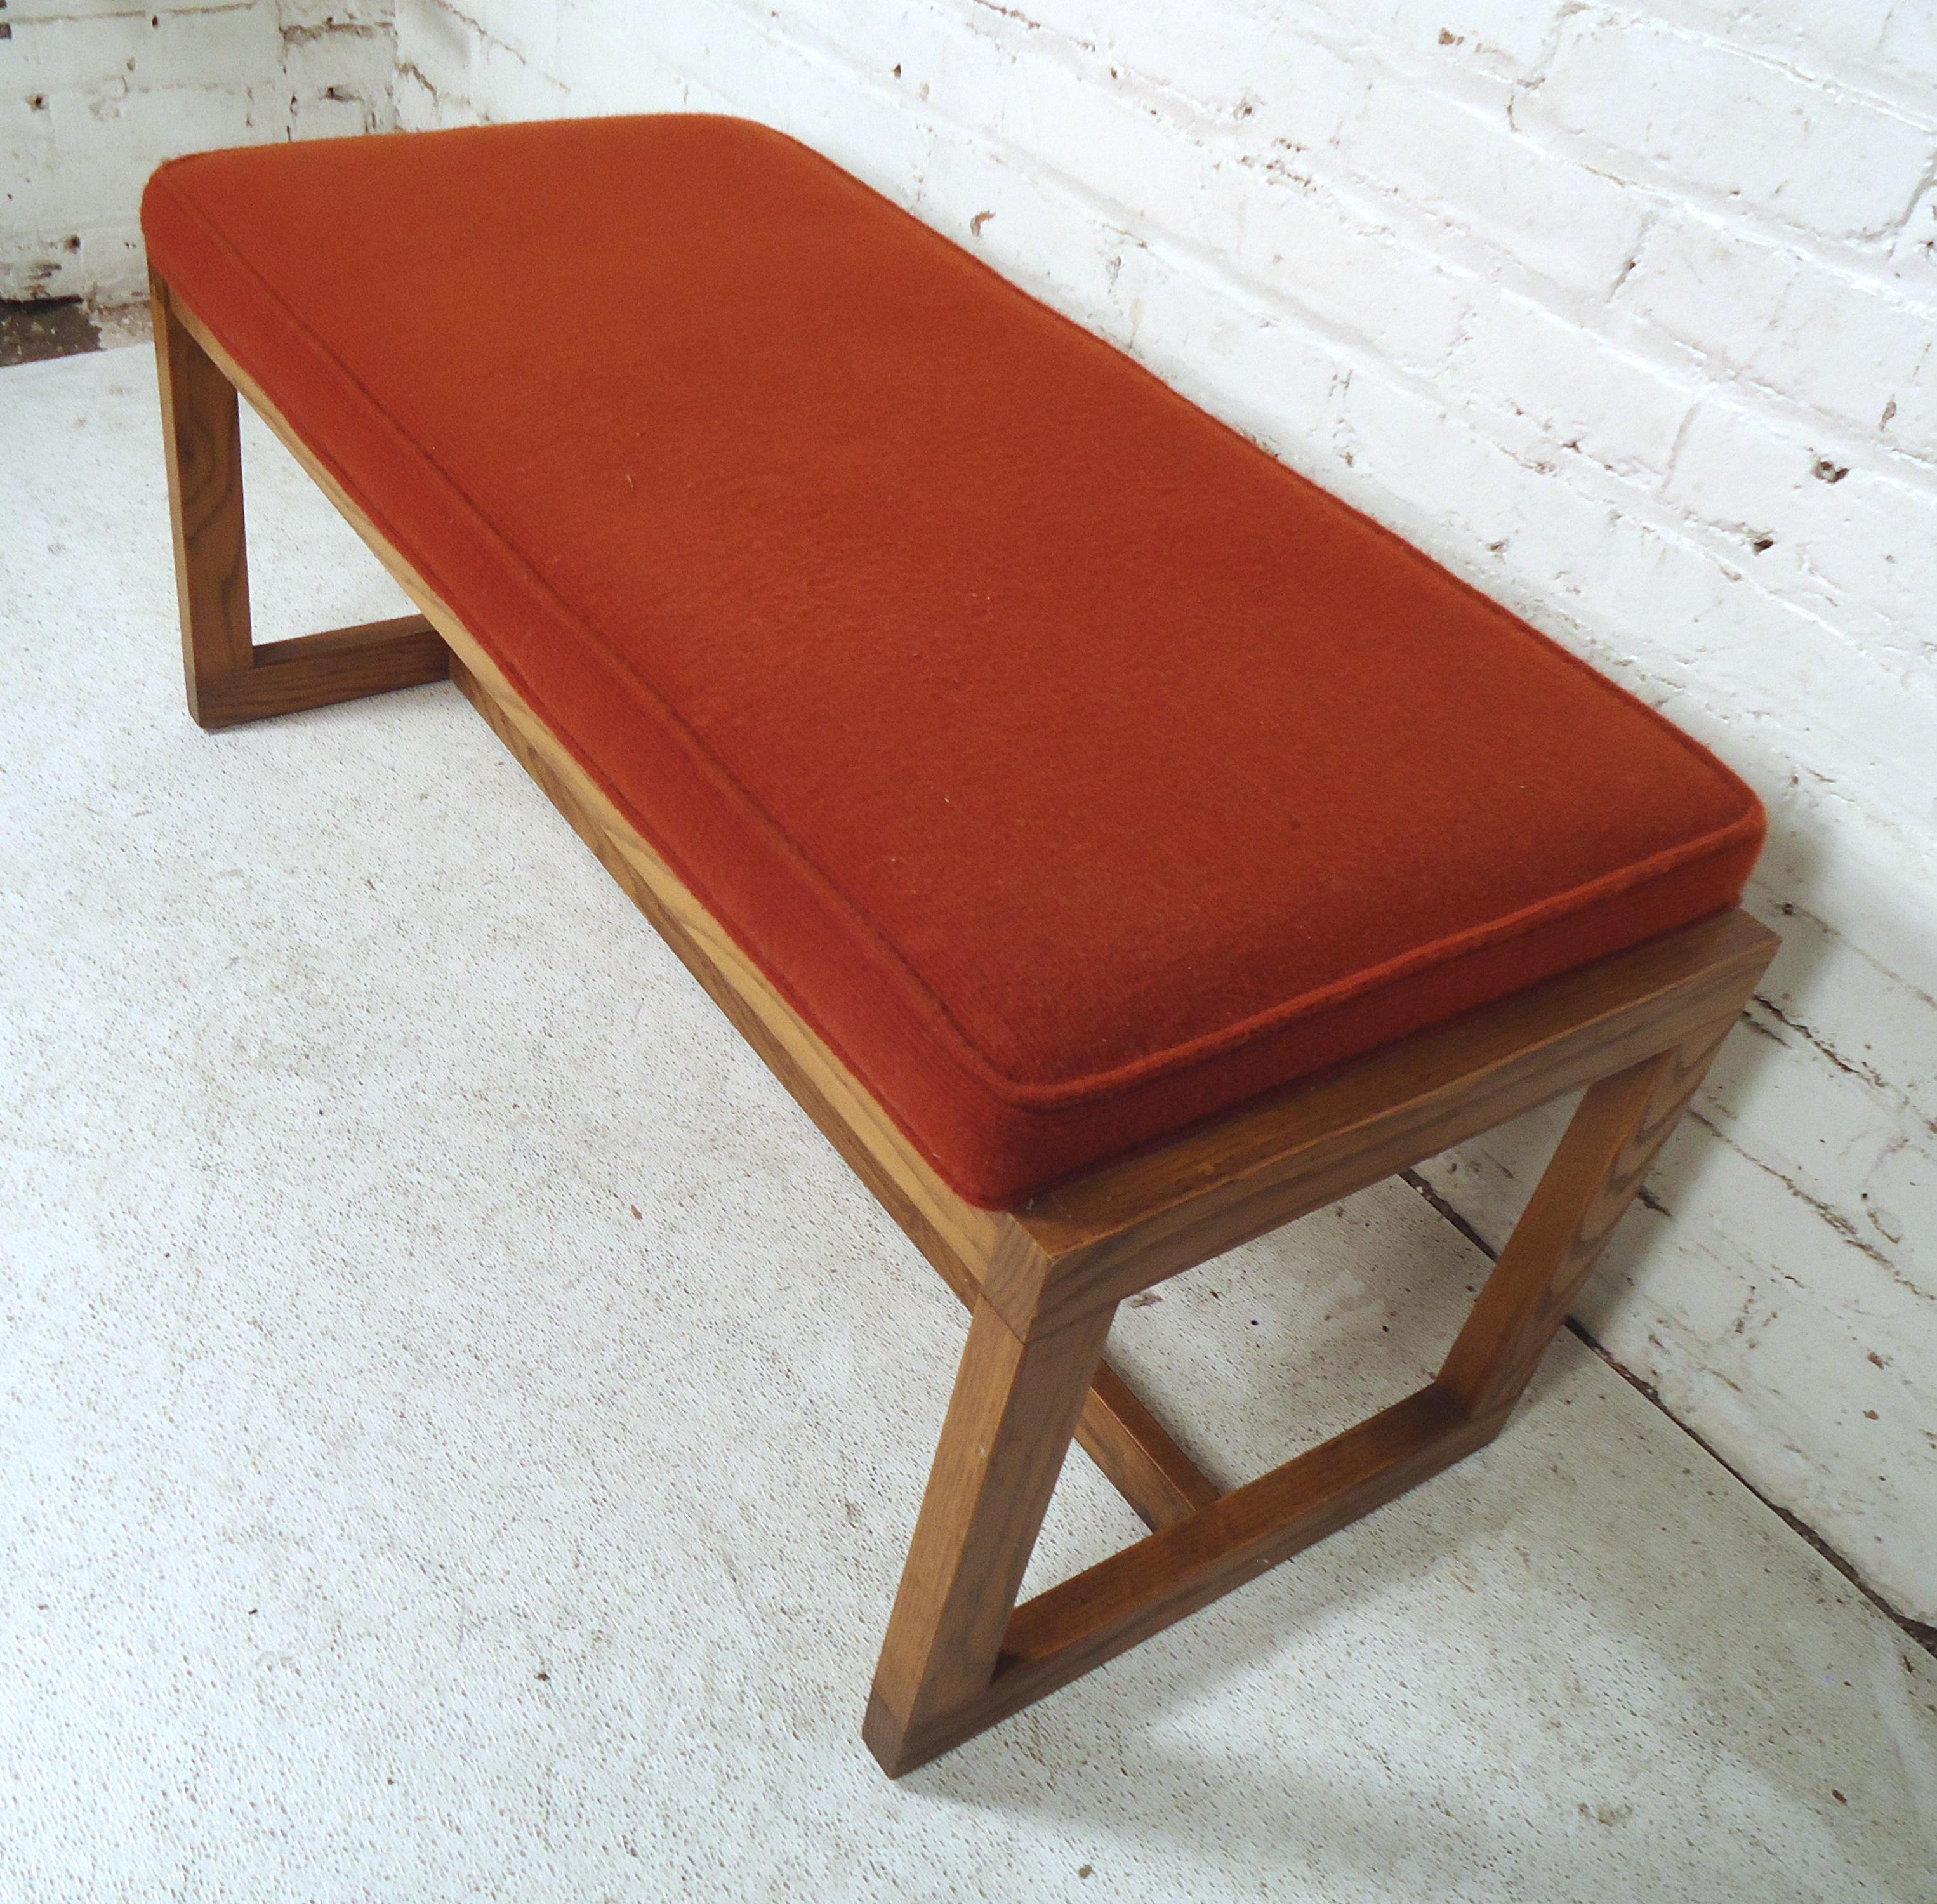 Vintage modern bench featured in orange fabric, on a set of sturdy sled legs.
(Please confirm item location - NY or NJ - with dealer).